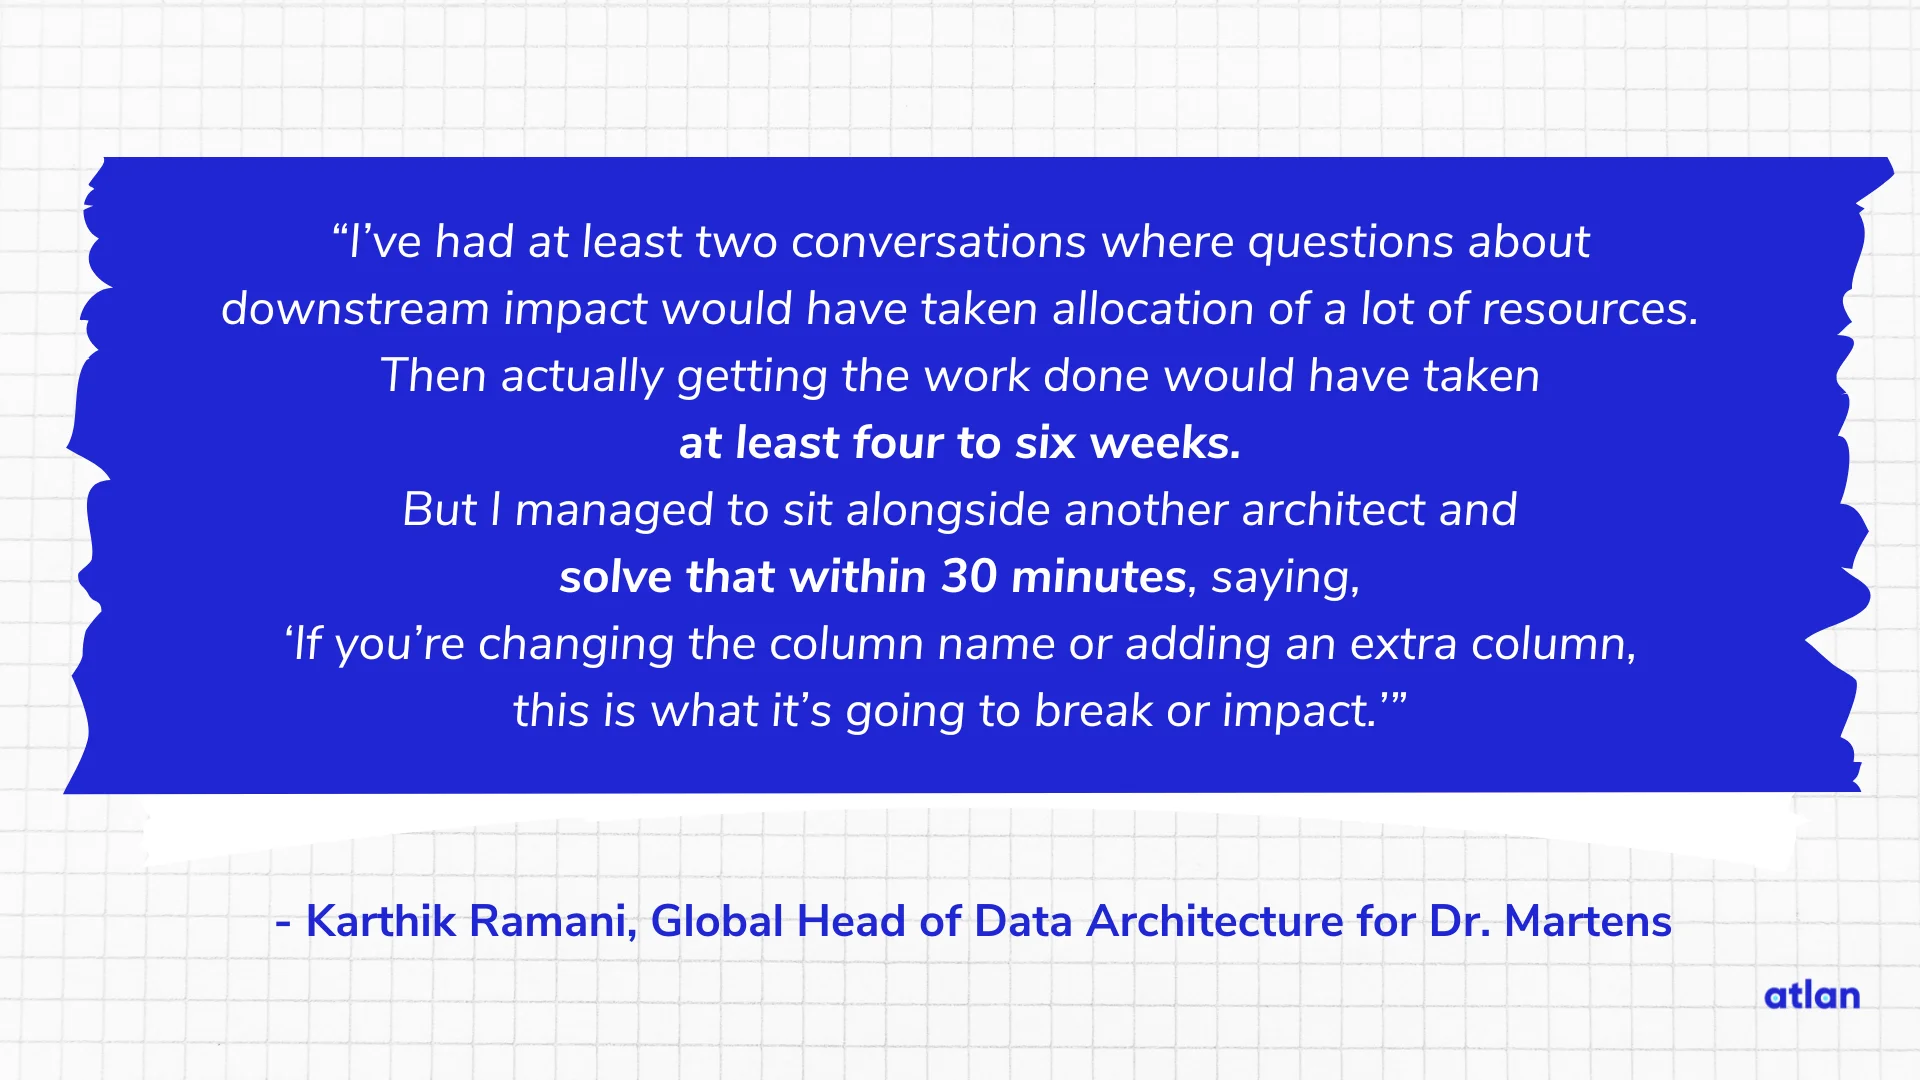 Karthik Ramani, Global Head of Data Architecture for Dr. Martens, on the benefits of automated lineage